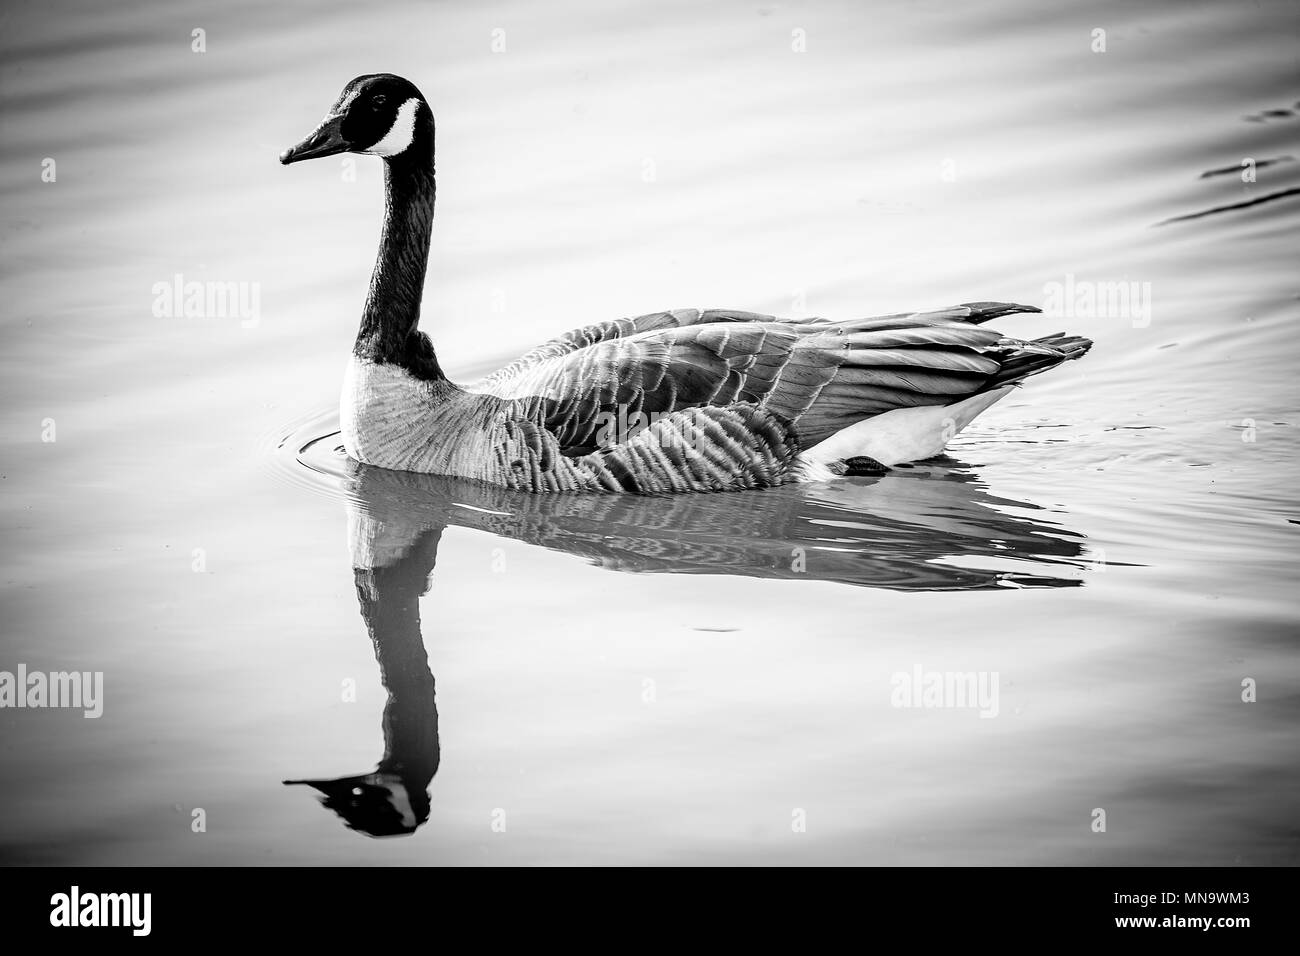 A greylag goose (Anser anser) swimming on a lake with reflections. Bodenham Lakes, Herefordshire. Stock Photo